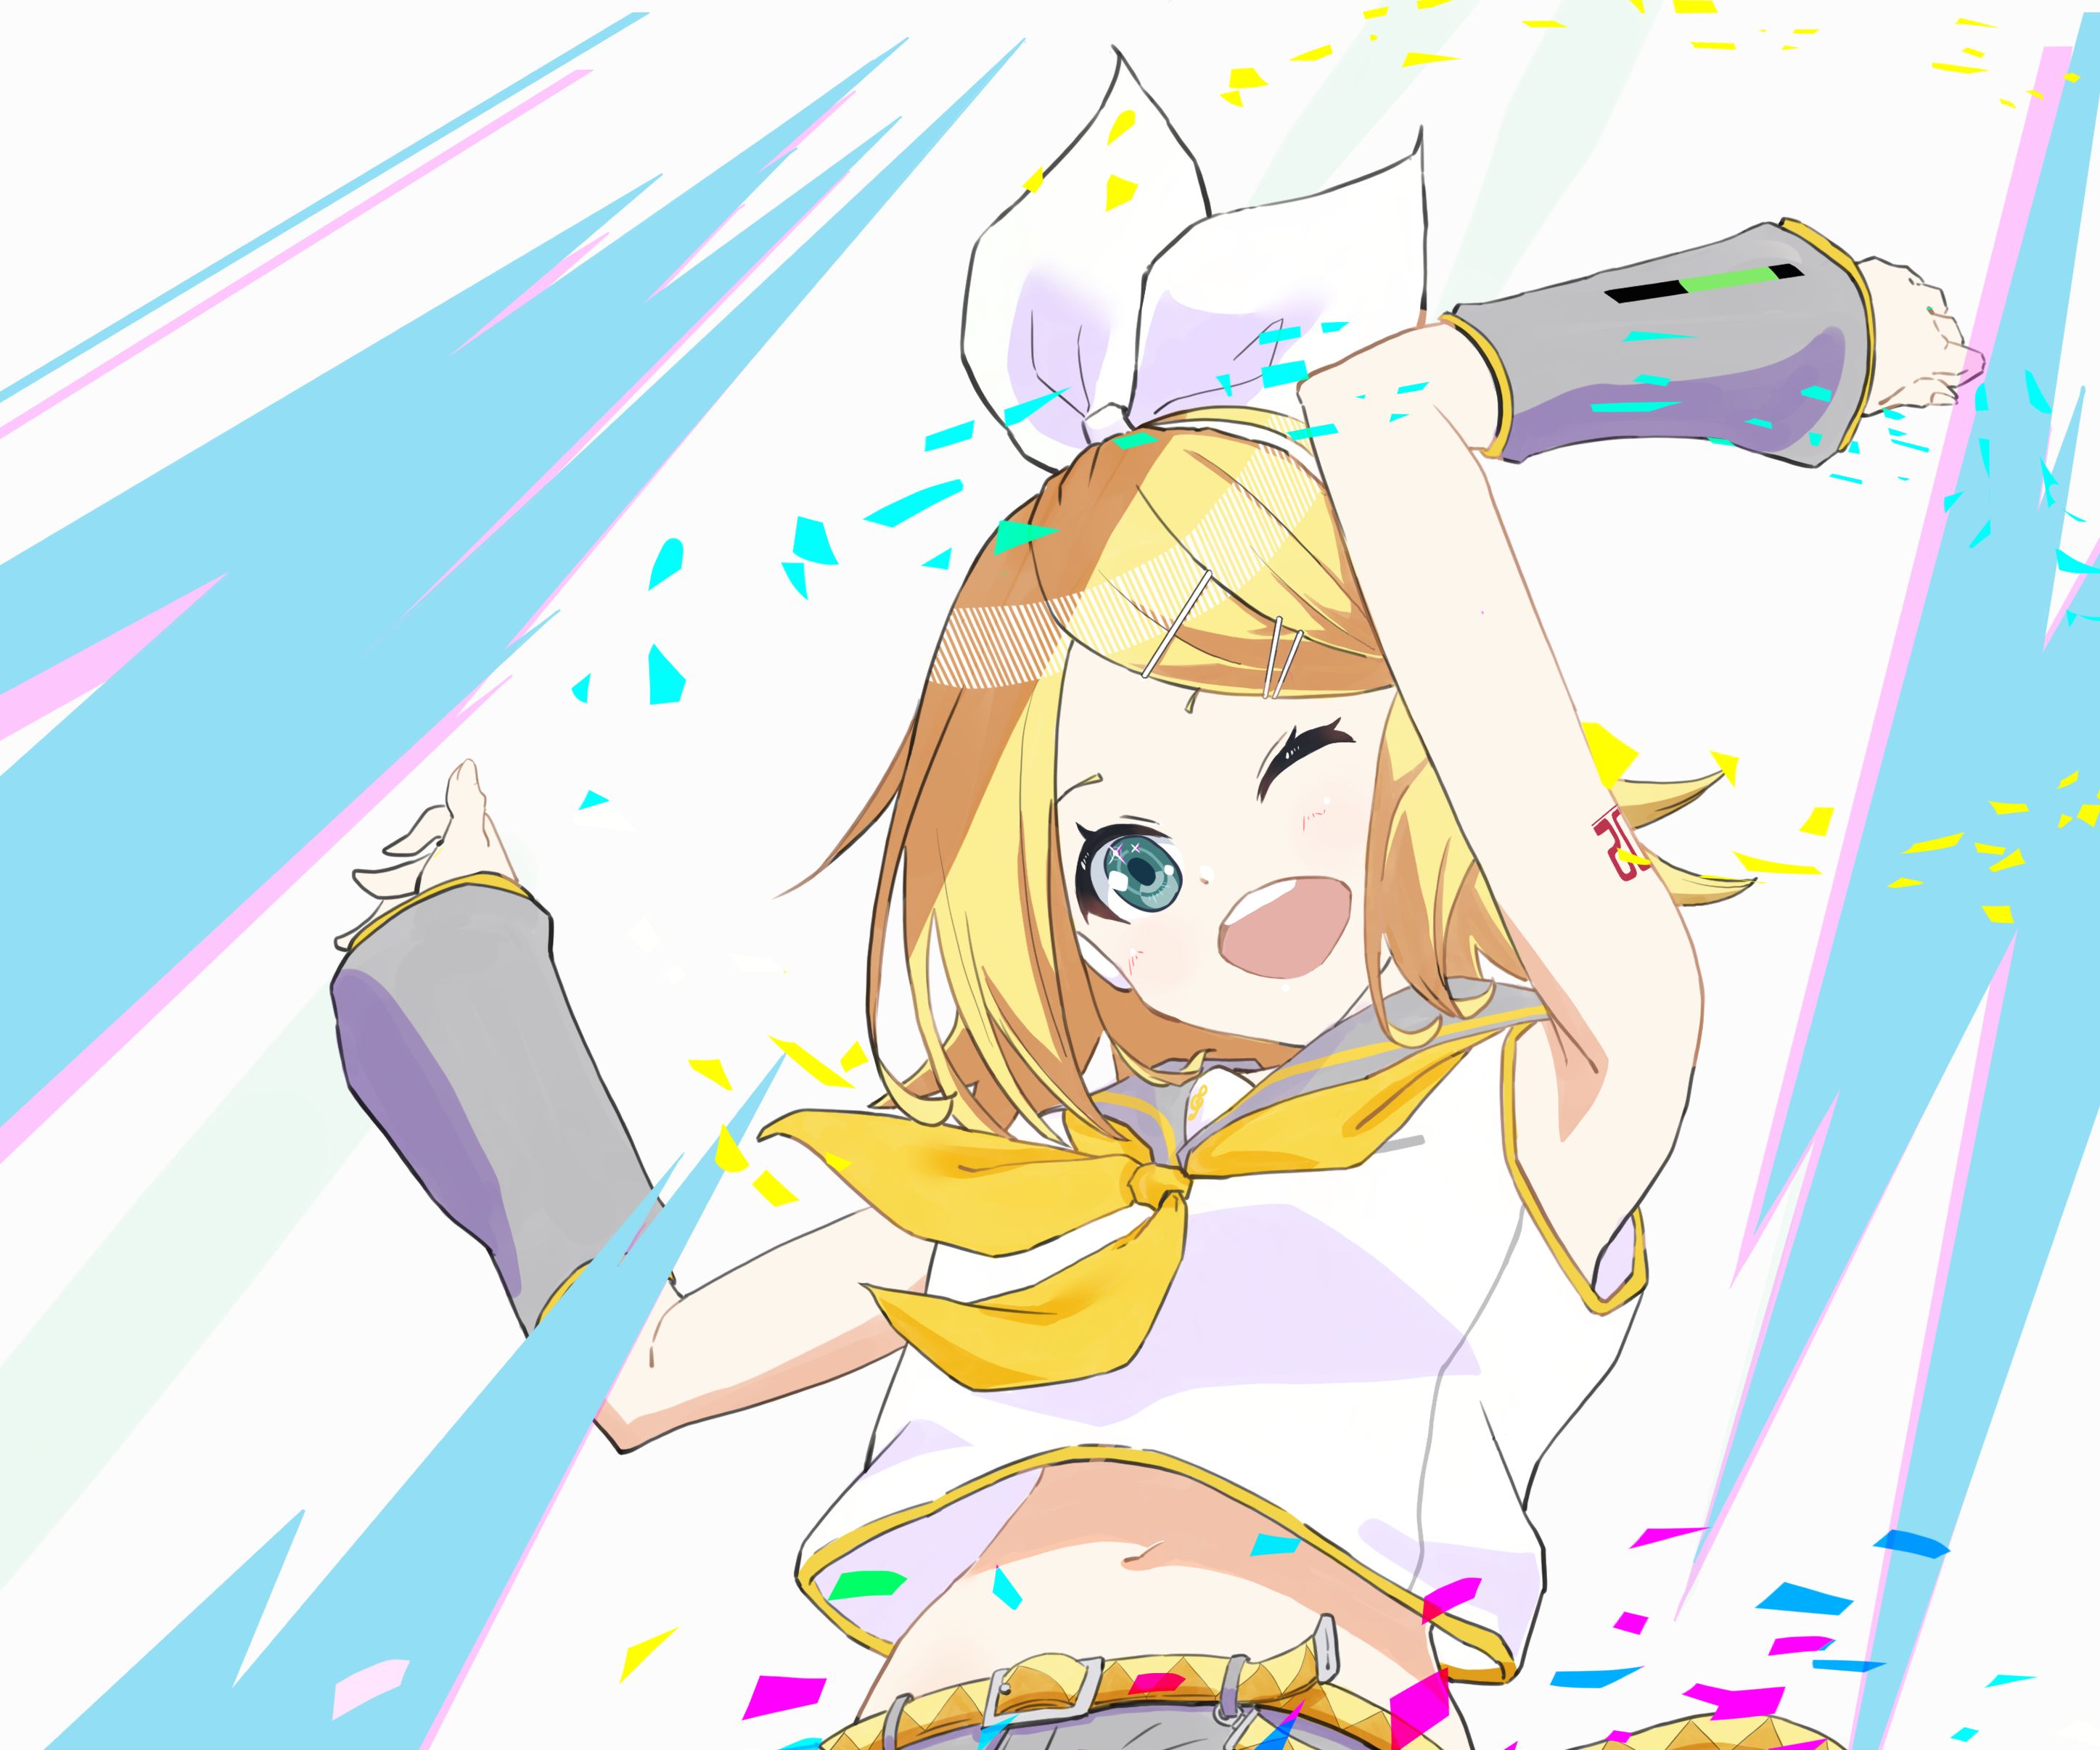 Kagamine Rin with a microphone and a winking expression - 